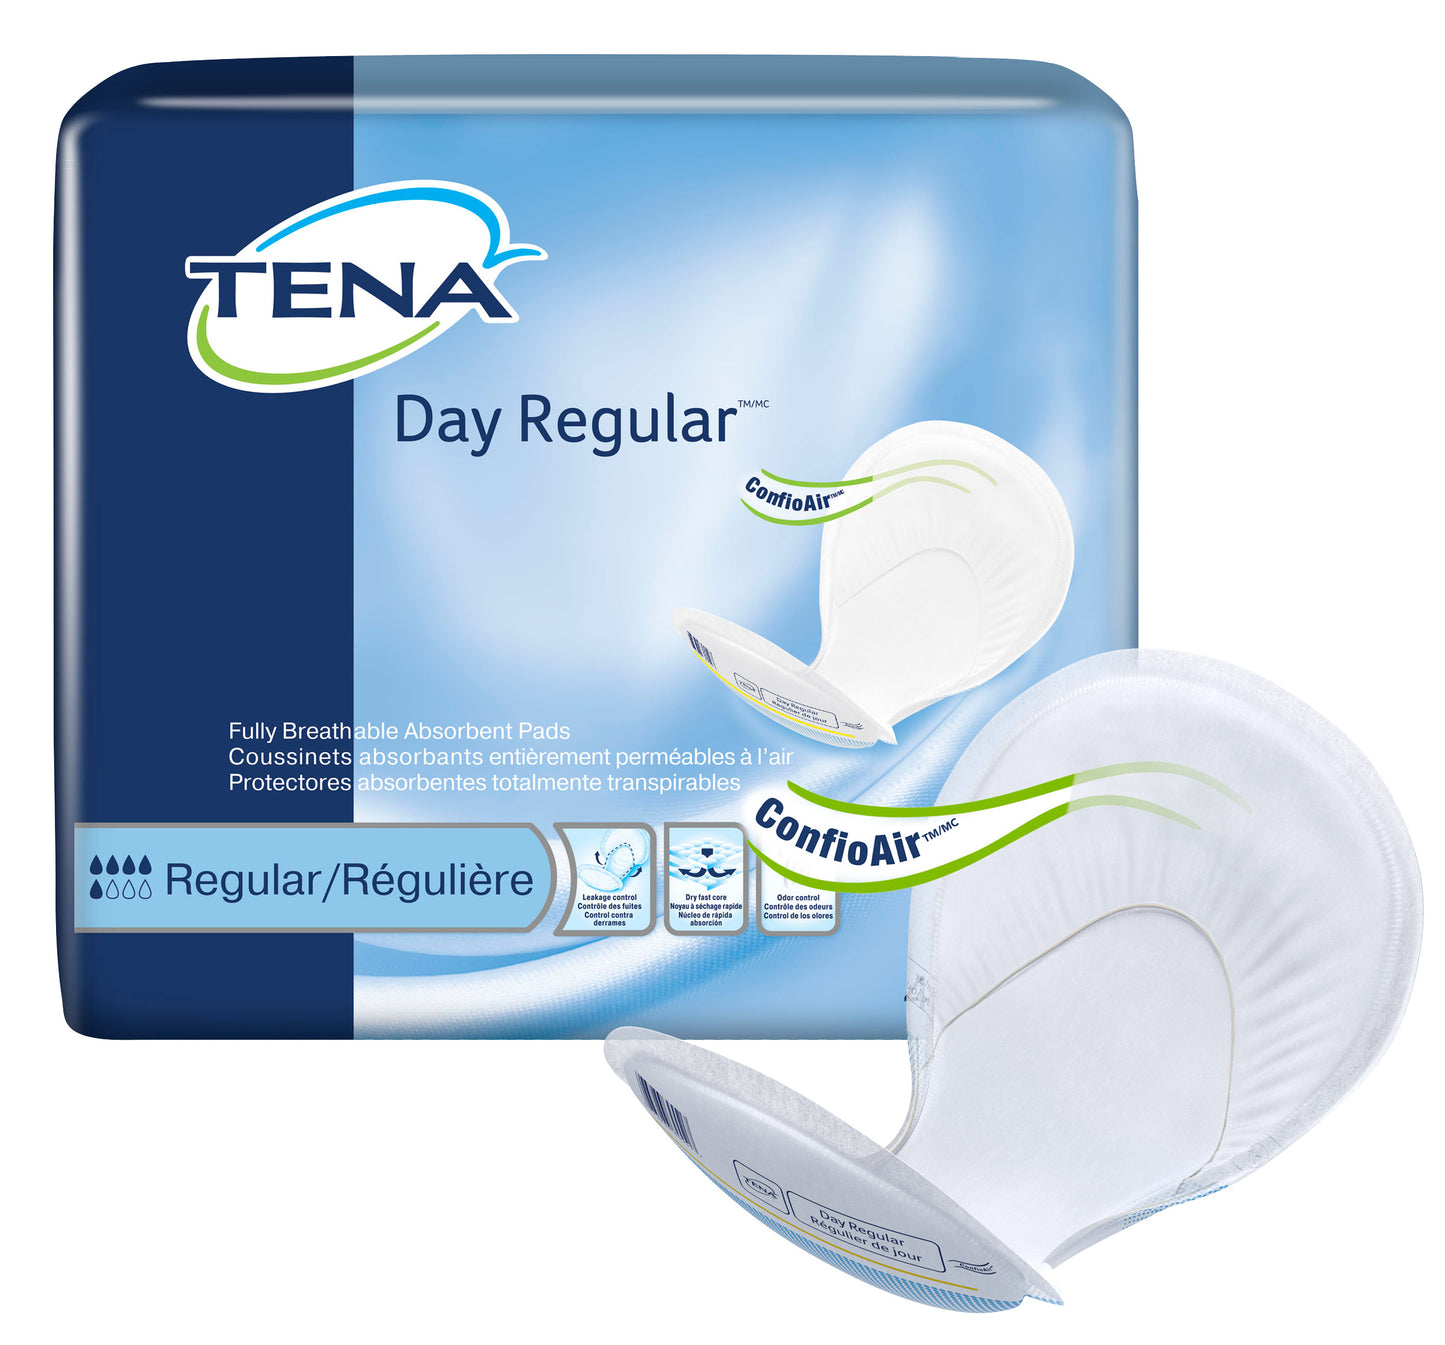 TENA® Day Regular Breathable Pads